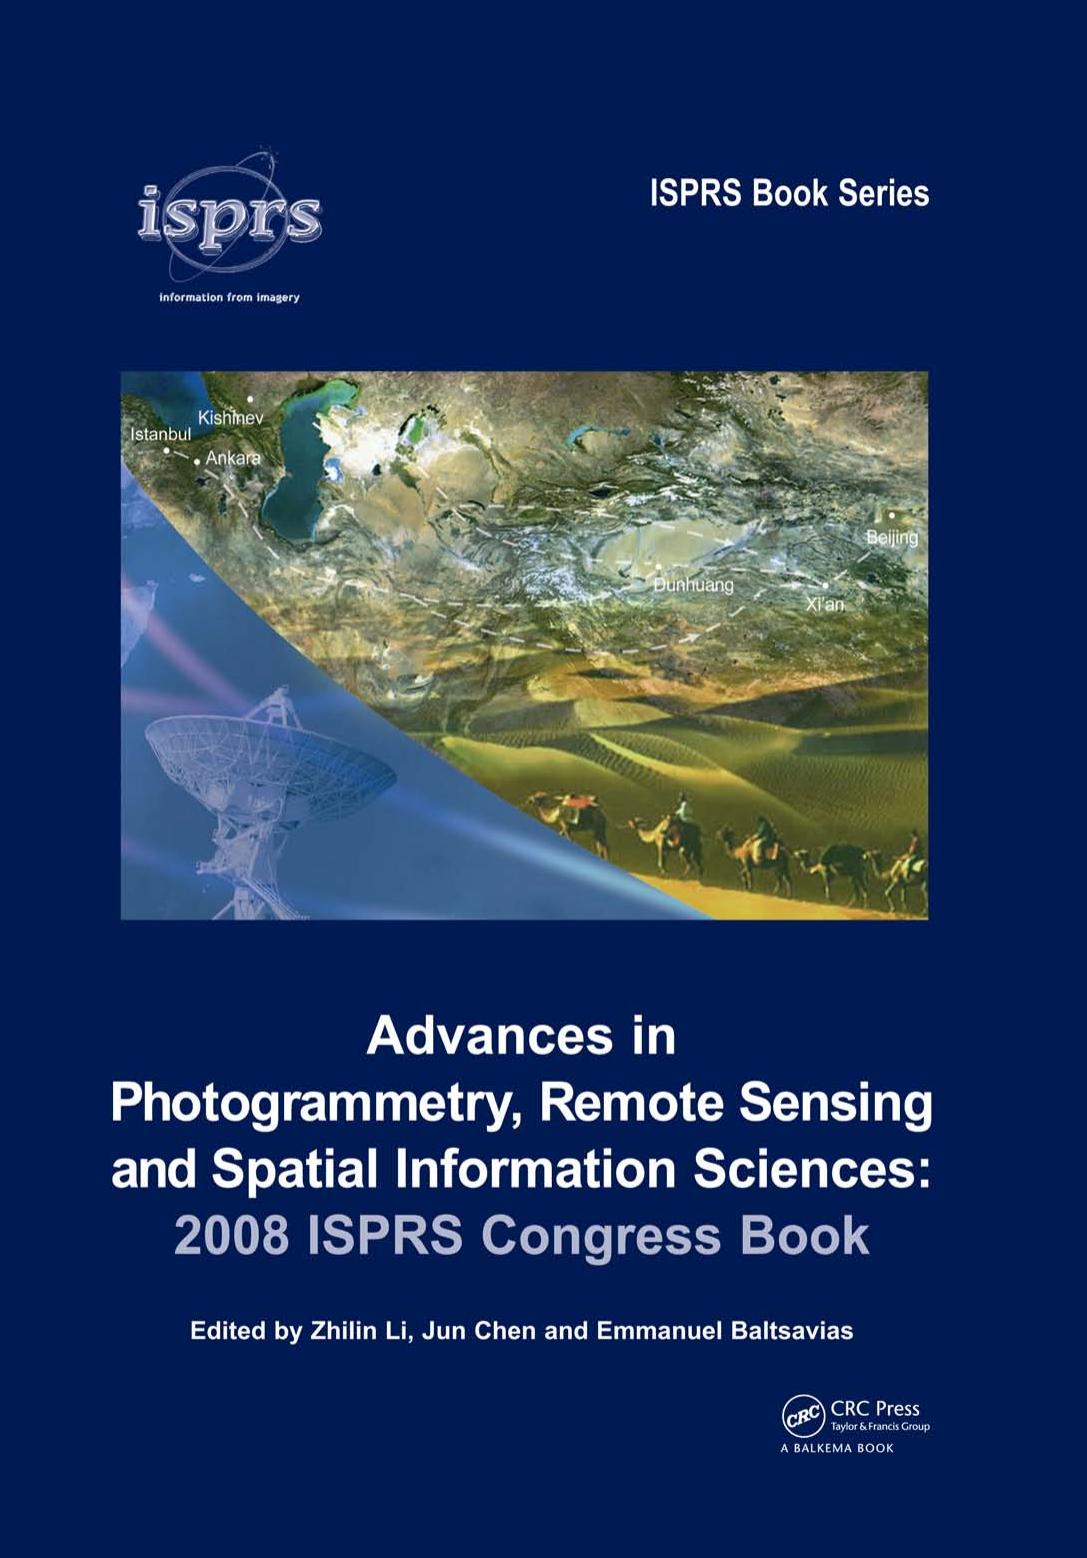 Advances in Photogrammetry, Remote Sensing and Spatial Information Sciences 2008